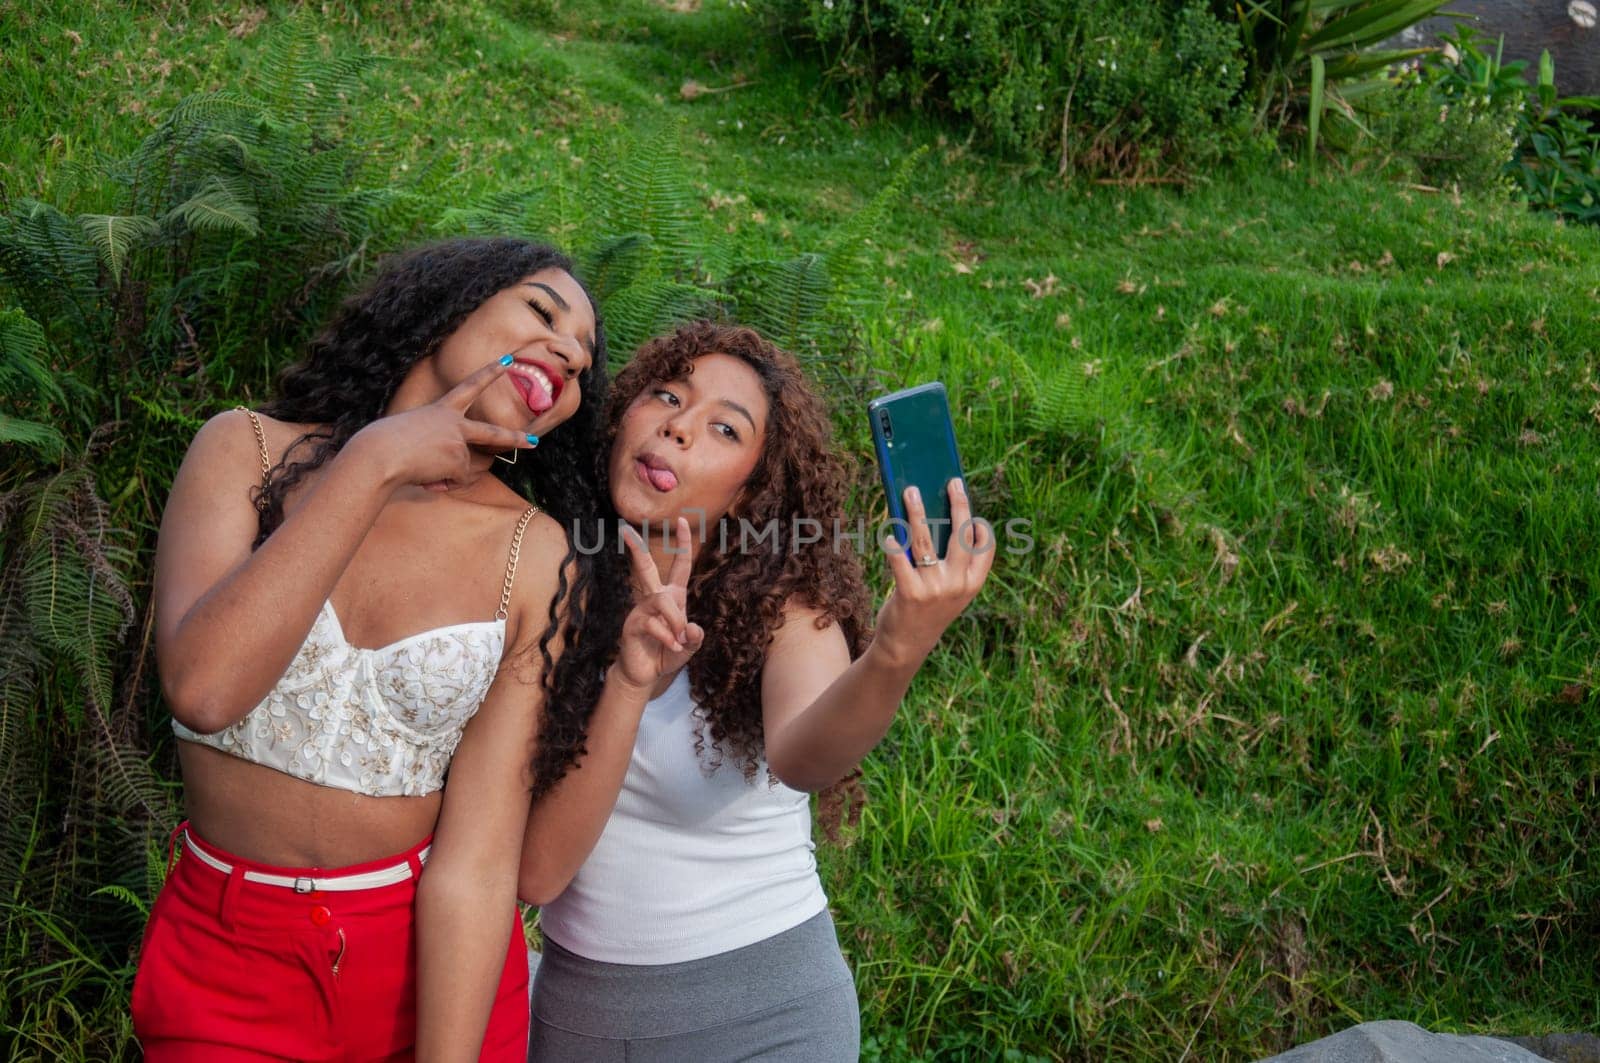 copy space of two teenagers taking a selfie with a funny expression with their tongues out and victory gestures with their fingers. High quality photo